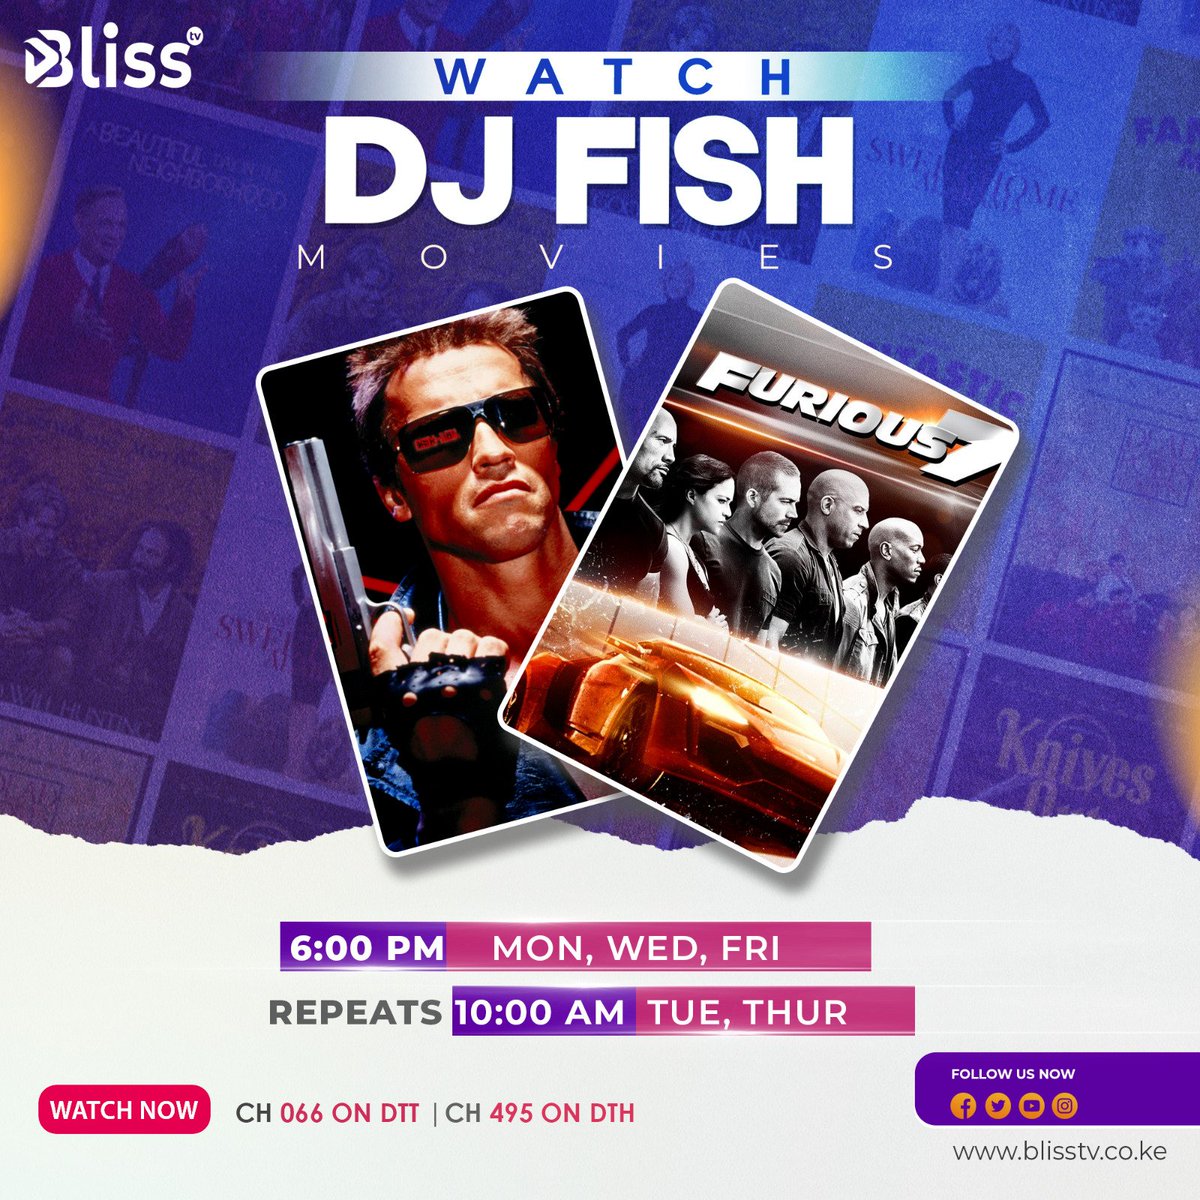 Barrrrrrabara kabisa! Pozi tena pozi zaidi tukiwaletea movies za #DJFish! Catch all his movies pale #BlissTV ch 66/495. >> Subscribe to the NYOTA BOUQUET at Ksh 329 and get 1 month upgrade to basic bouquet ! Subscribe to the NOVA BOUQUET and get 1 month upgrade to Smart…